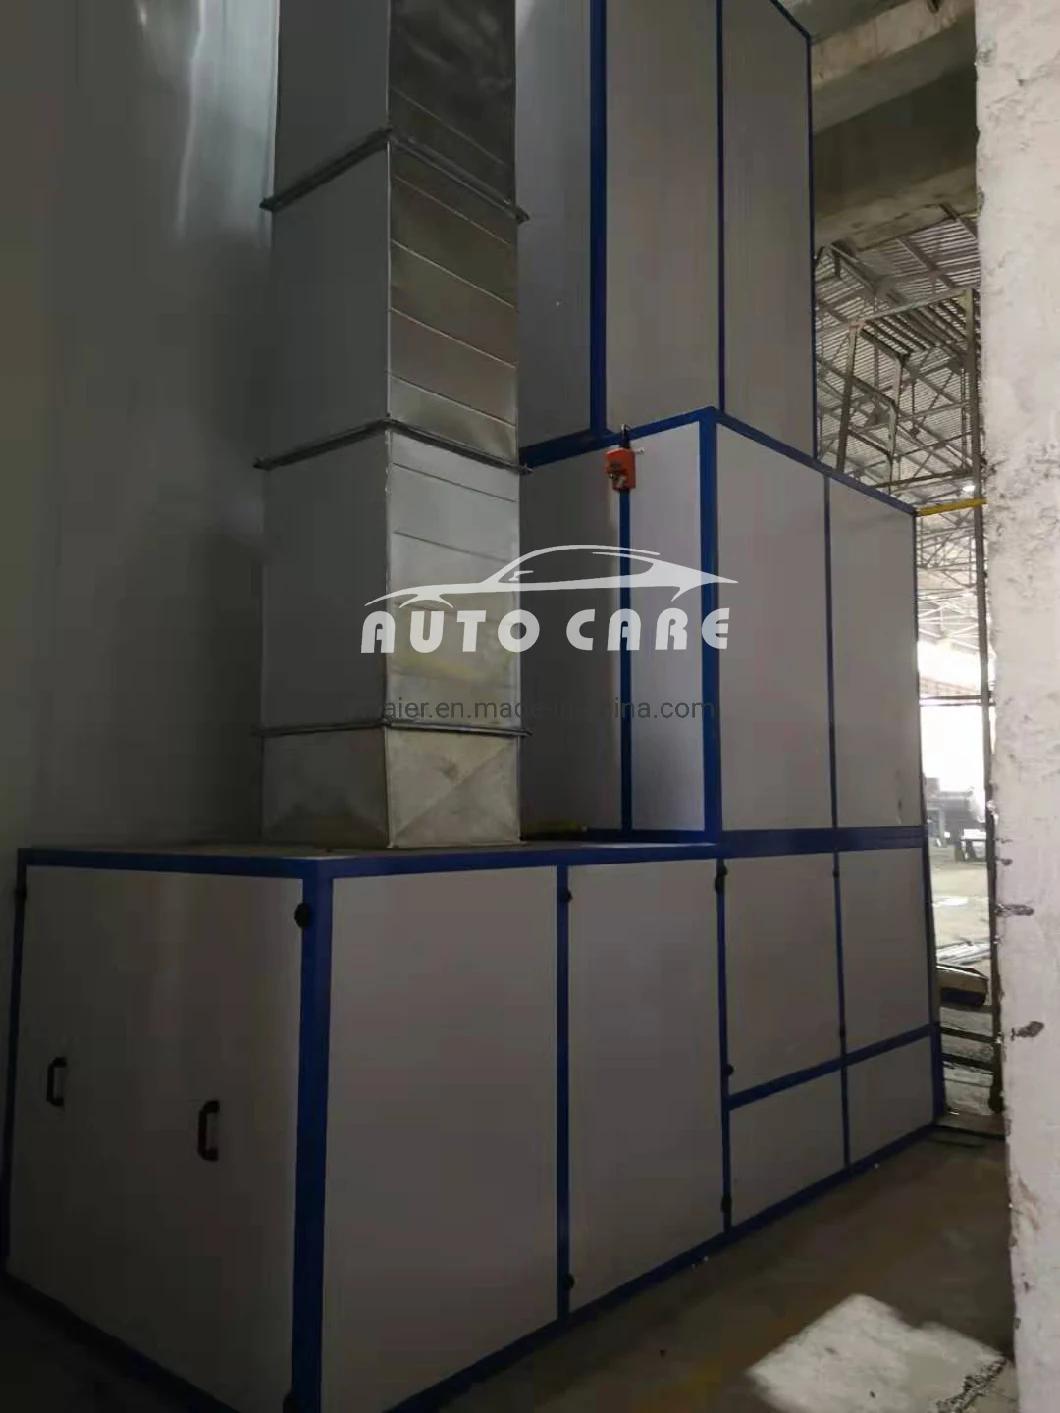 Bus Spraying Booth/Truck Paint Oven for Sale